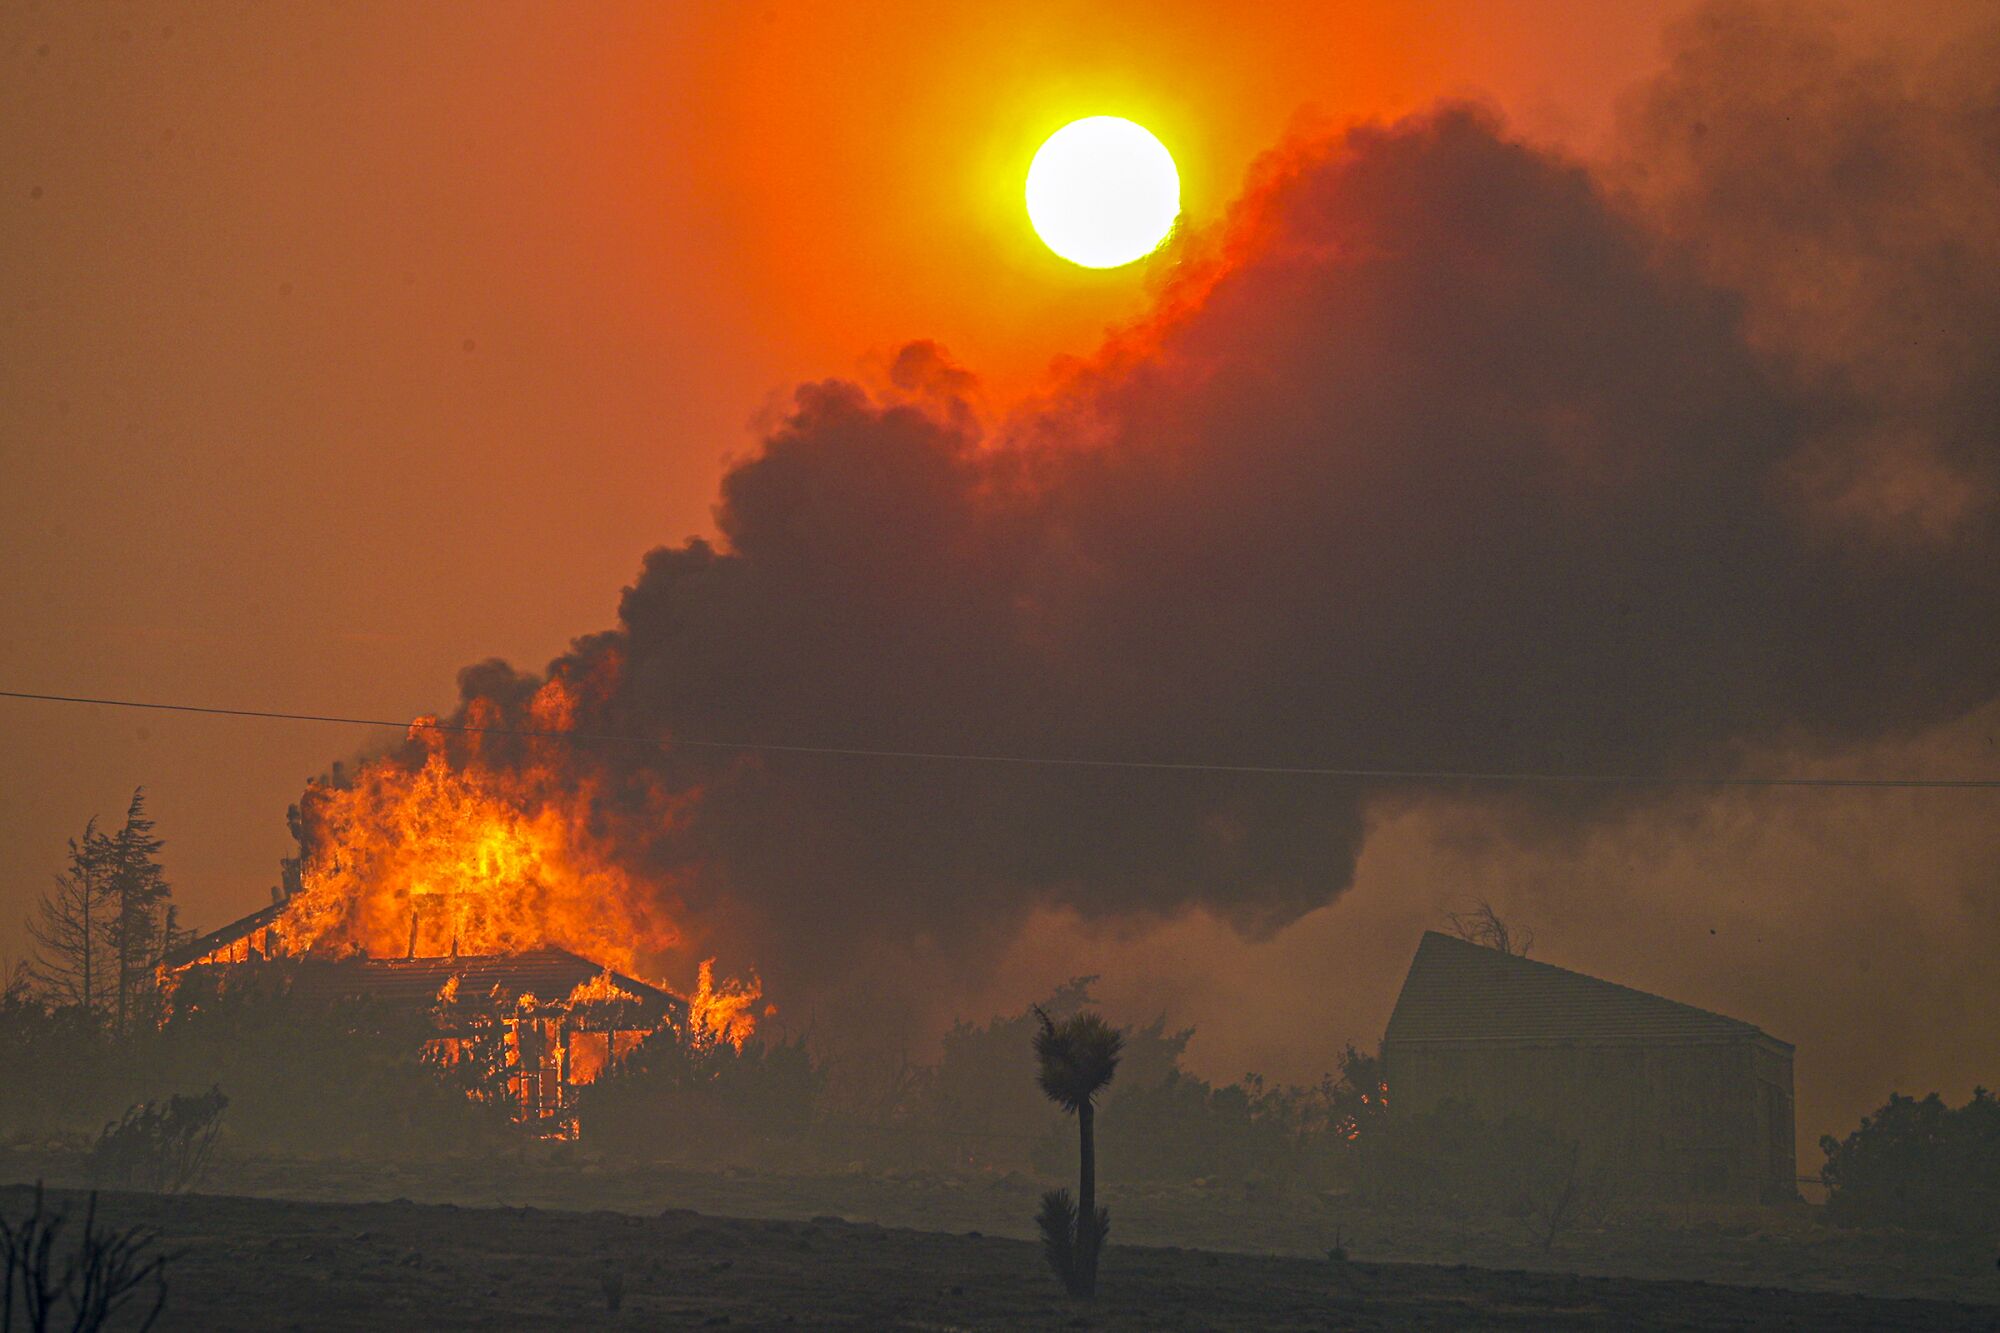 The setting sun is obscured by heavy smoke from the Bobcat fire as seen from Littlerock, Calif., on Friday.